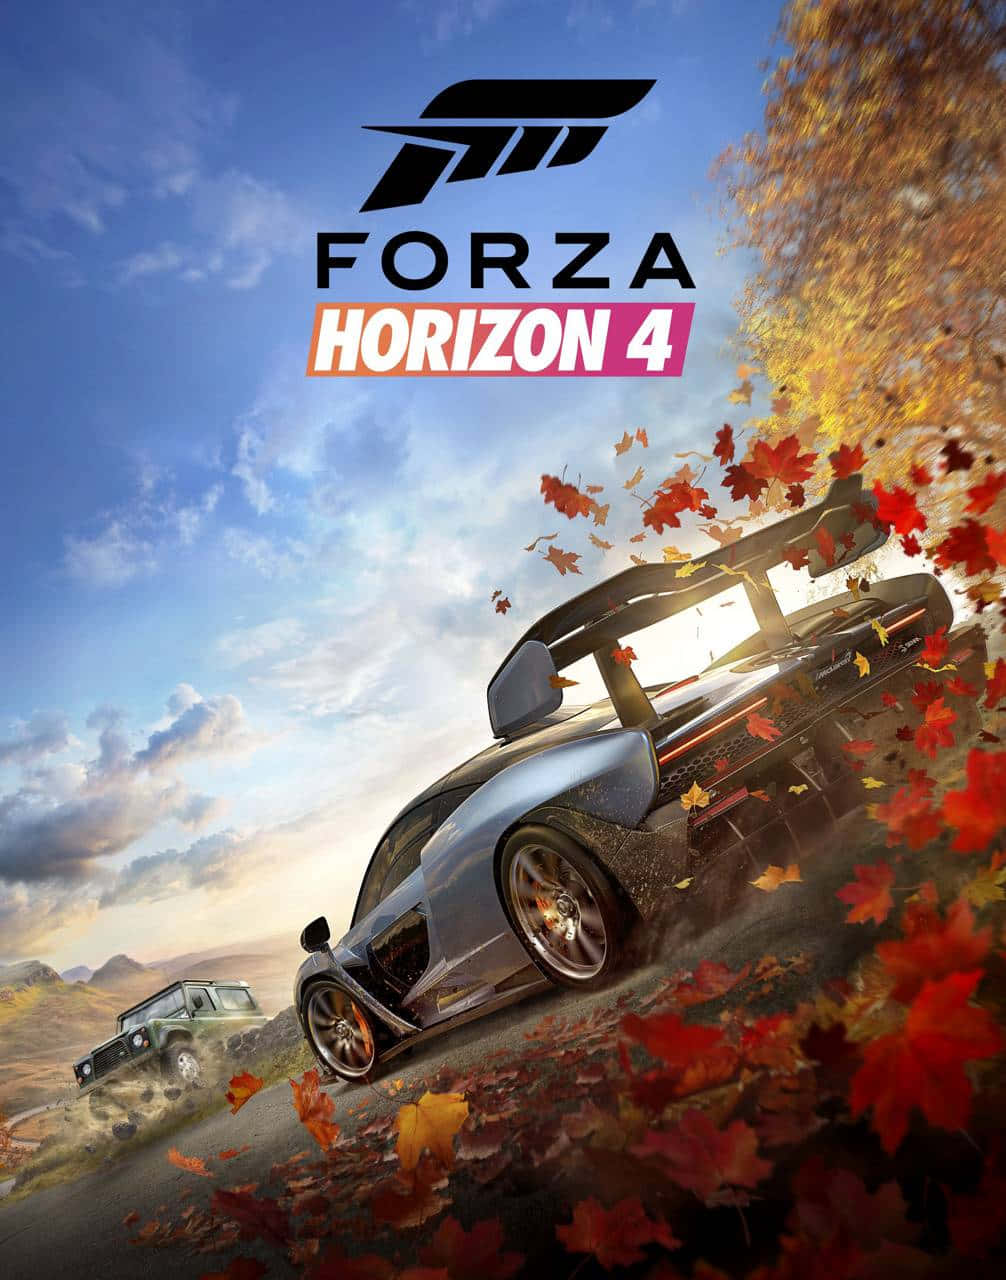 Enjoy Android Forza Horizon 4 in high definition